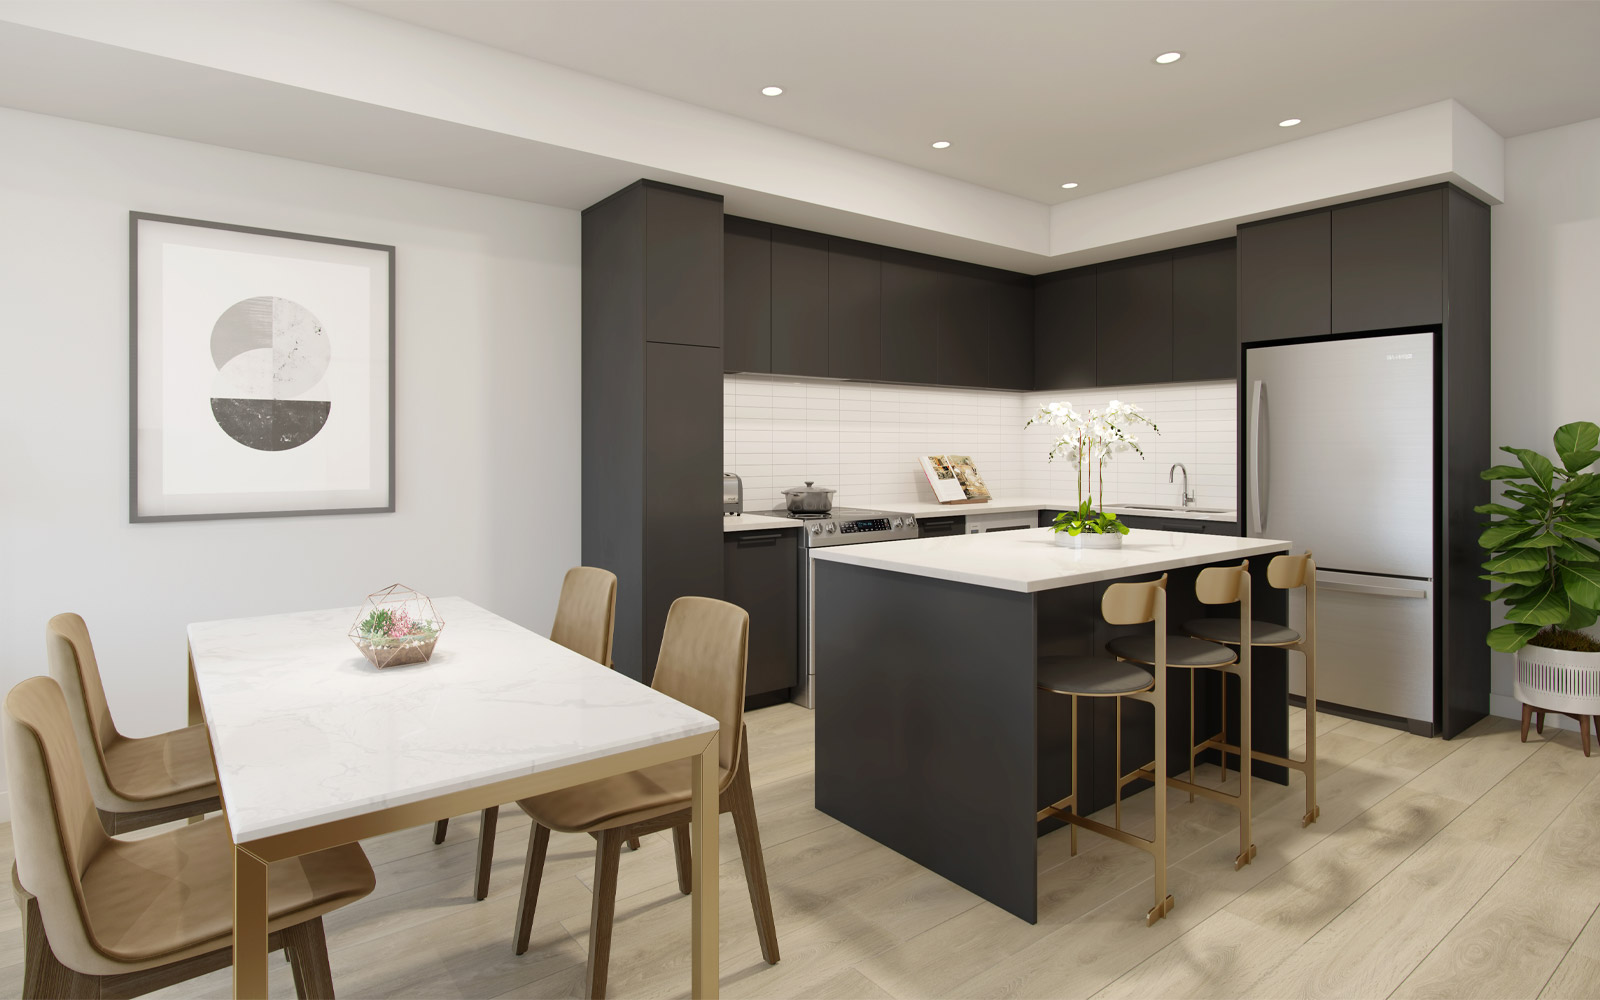 cam-kitchen-and-dining-capella-university-district-calgary